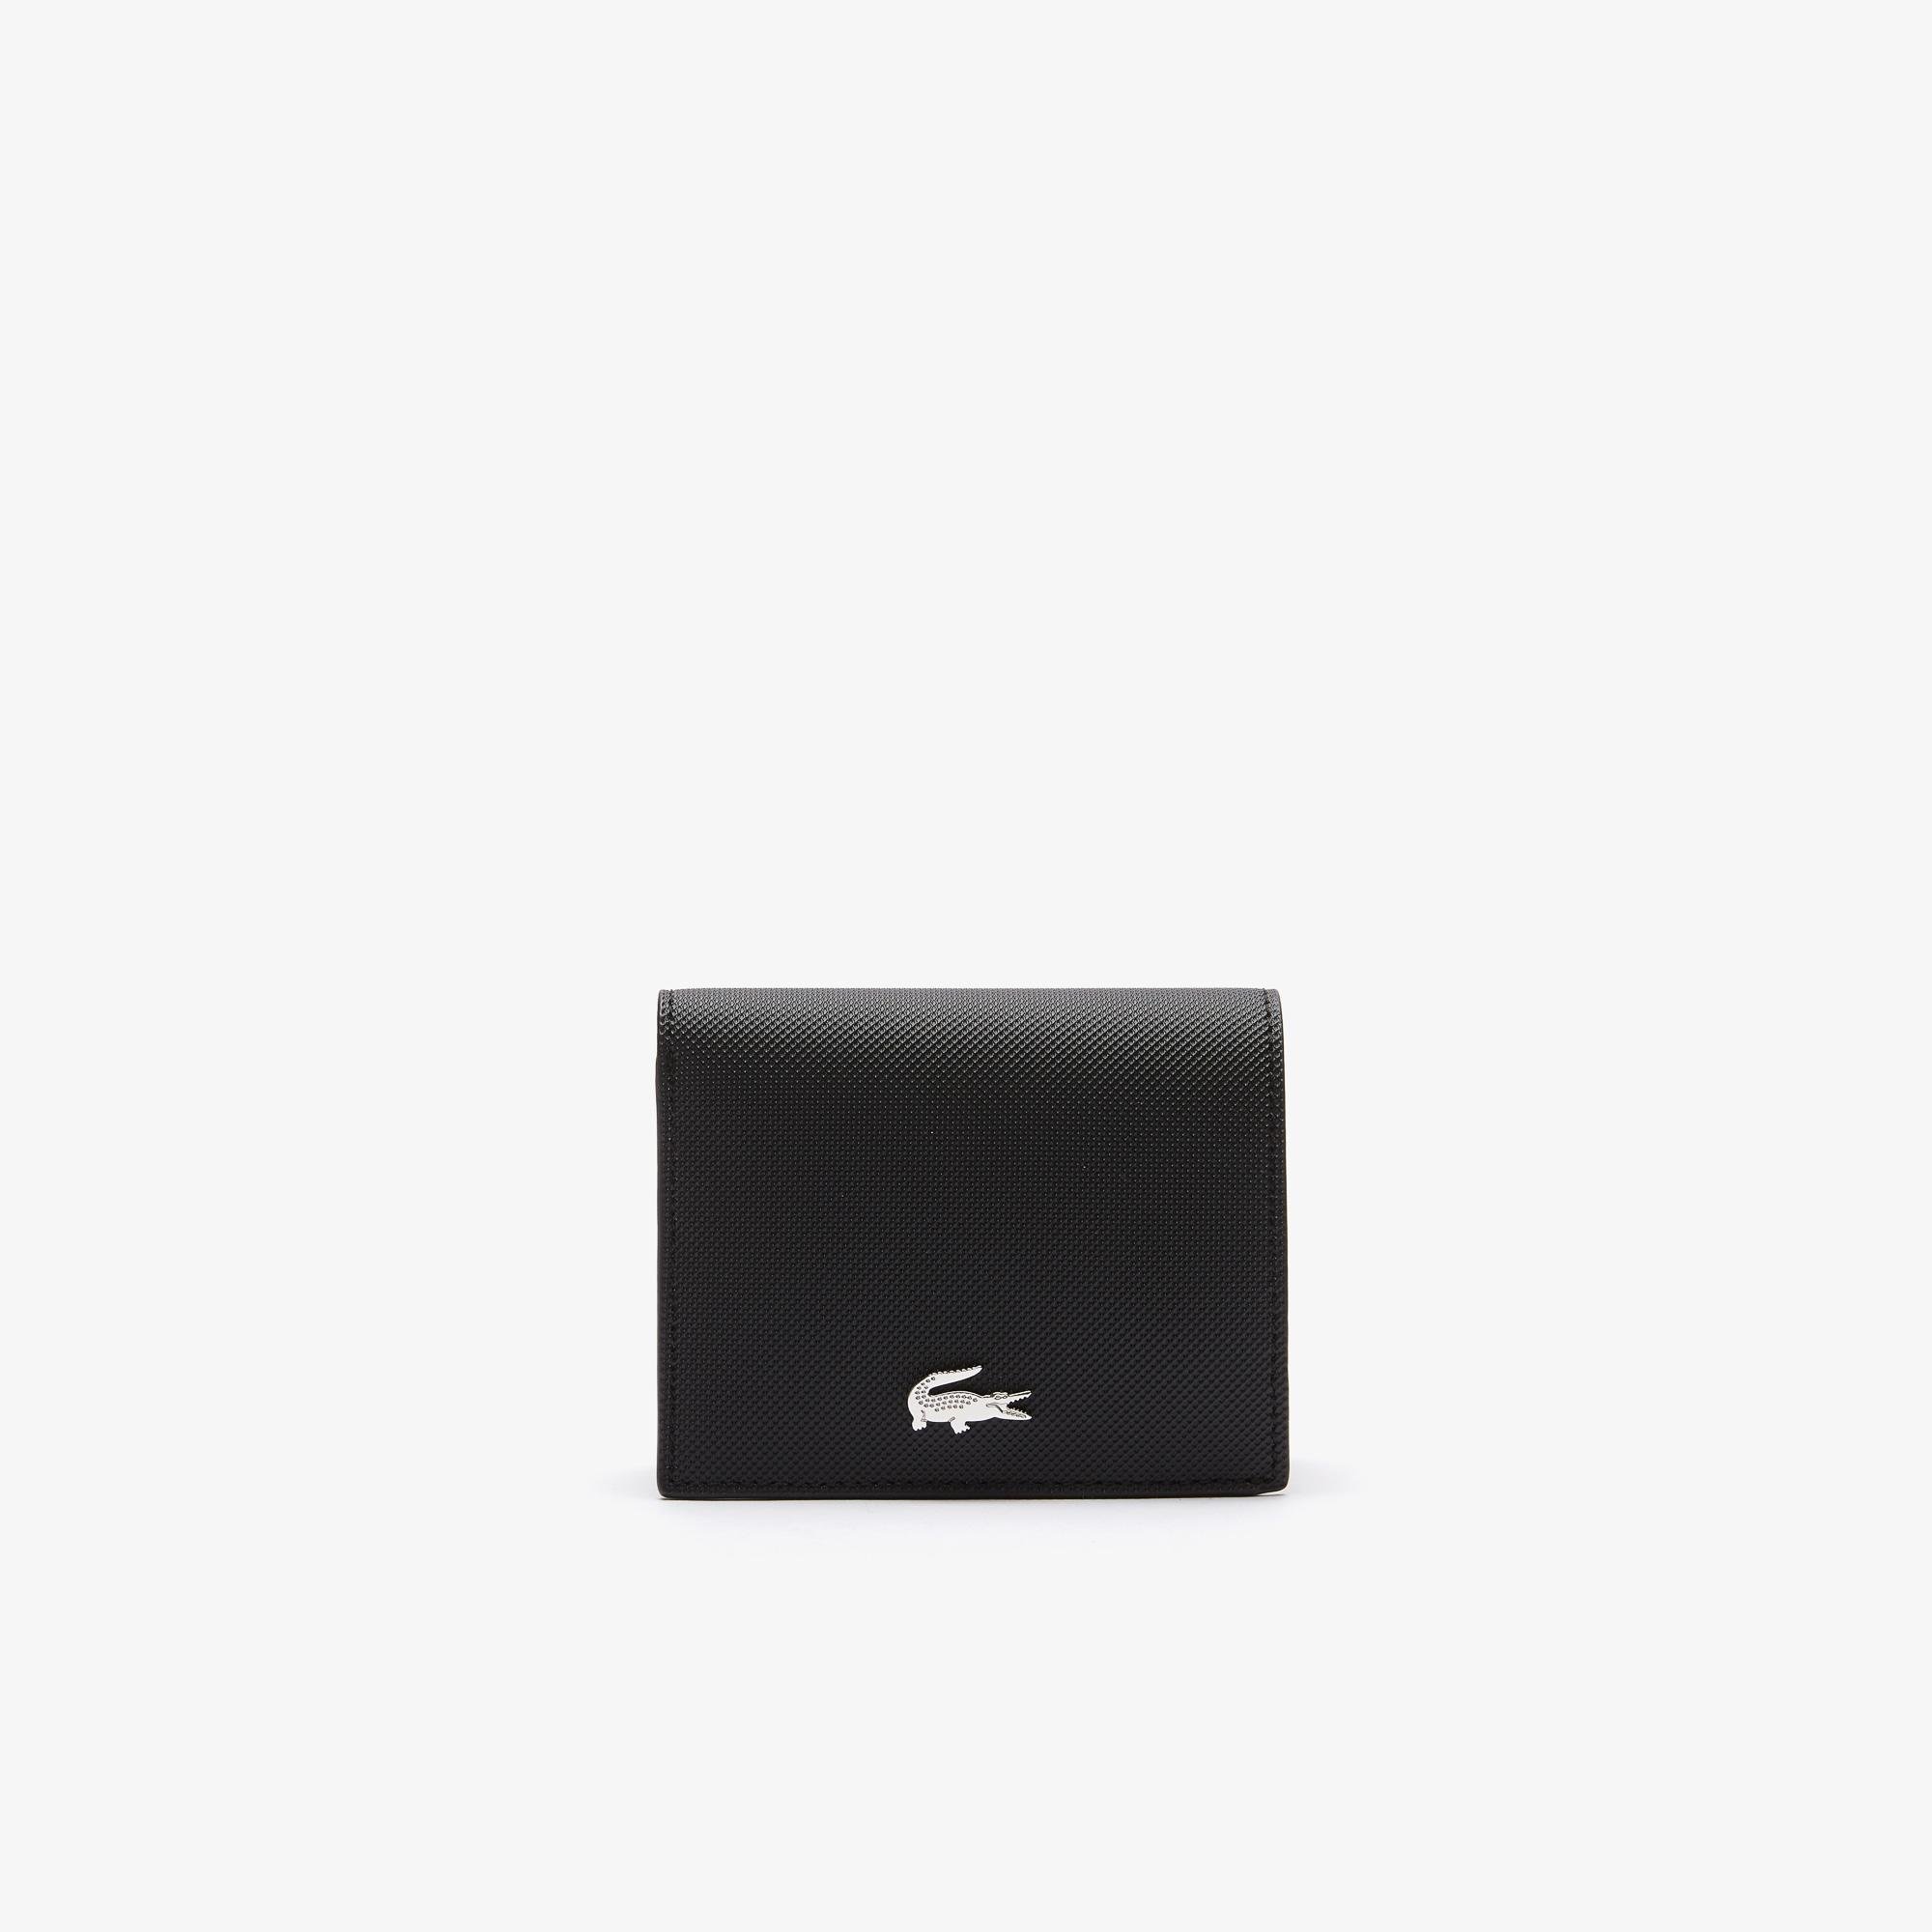 Lacoste Women's Anna Small Snap Wallet